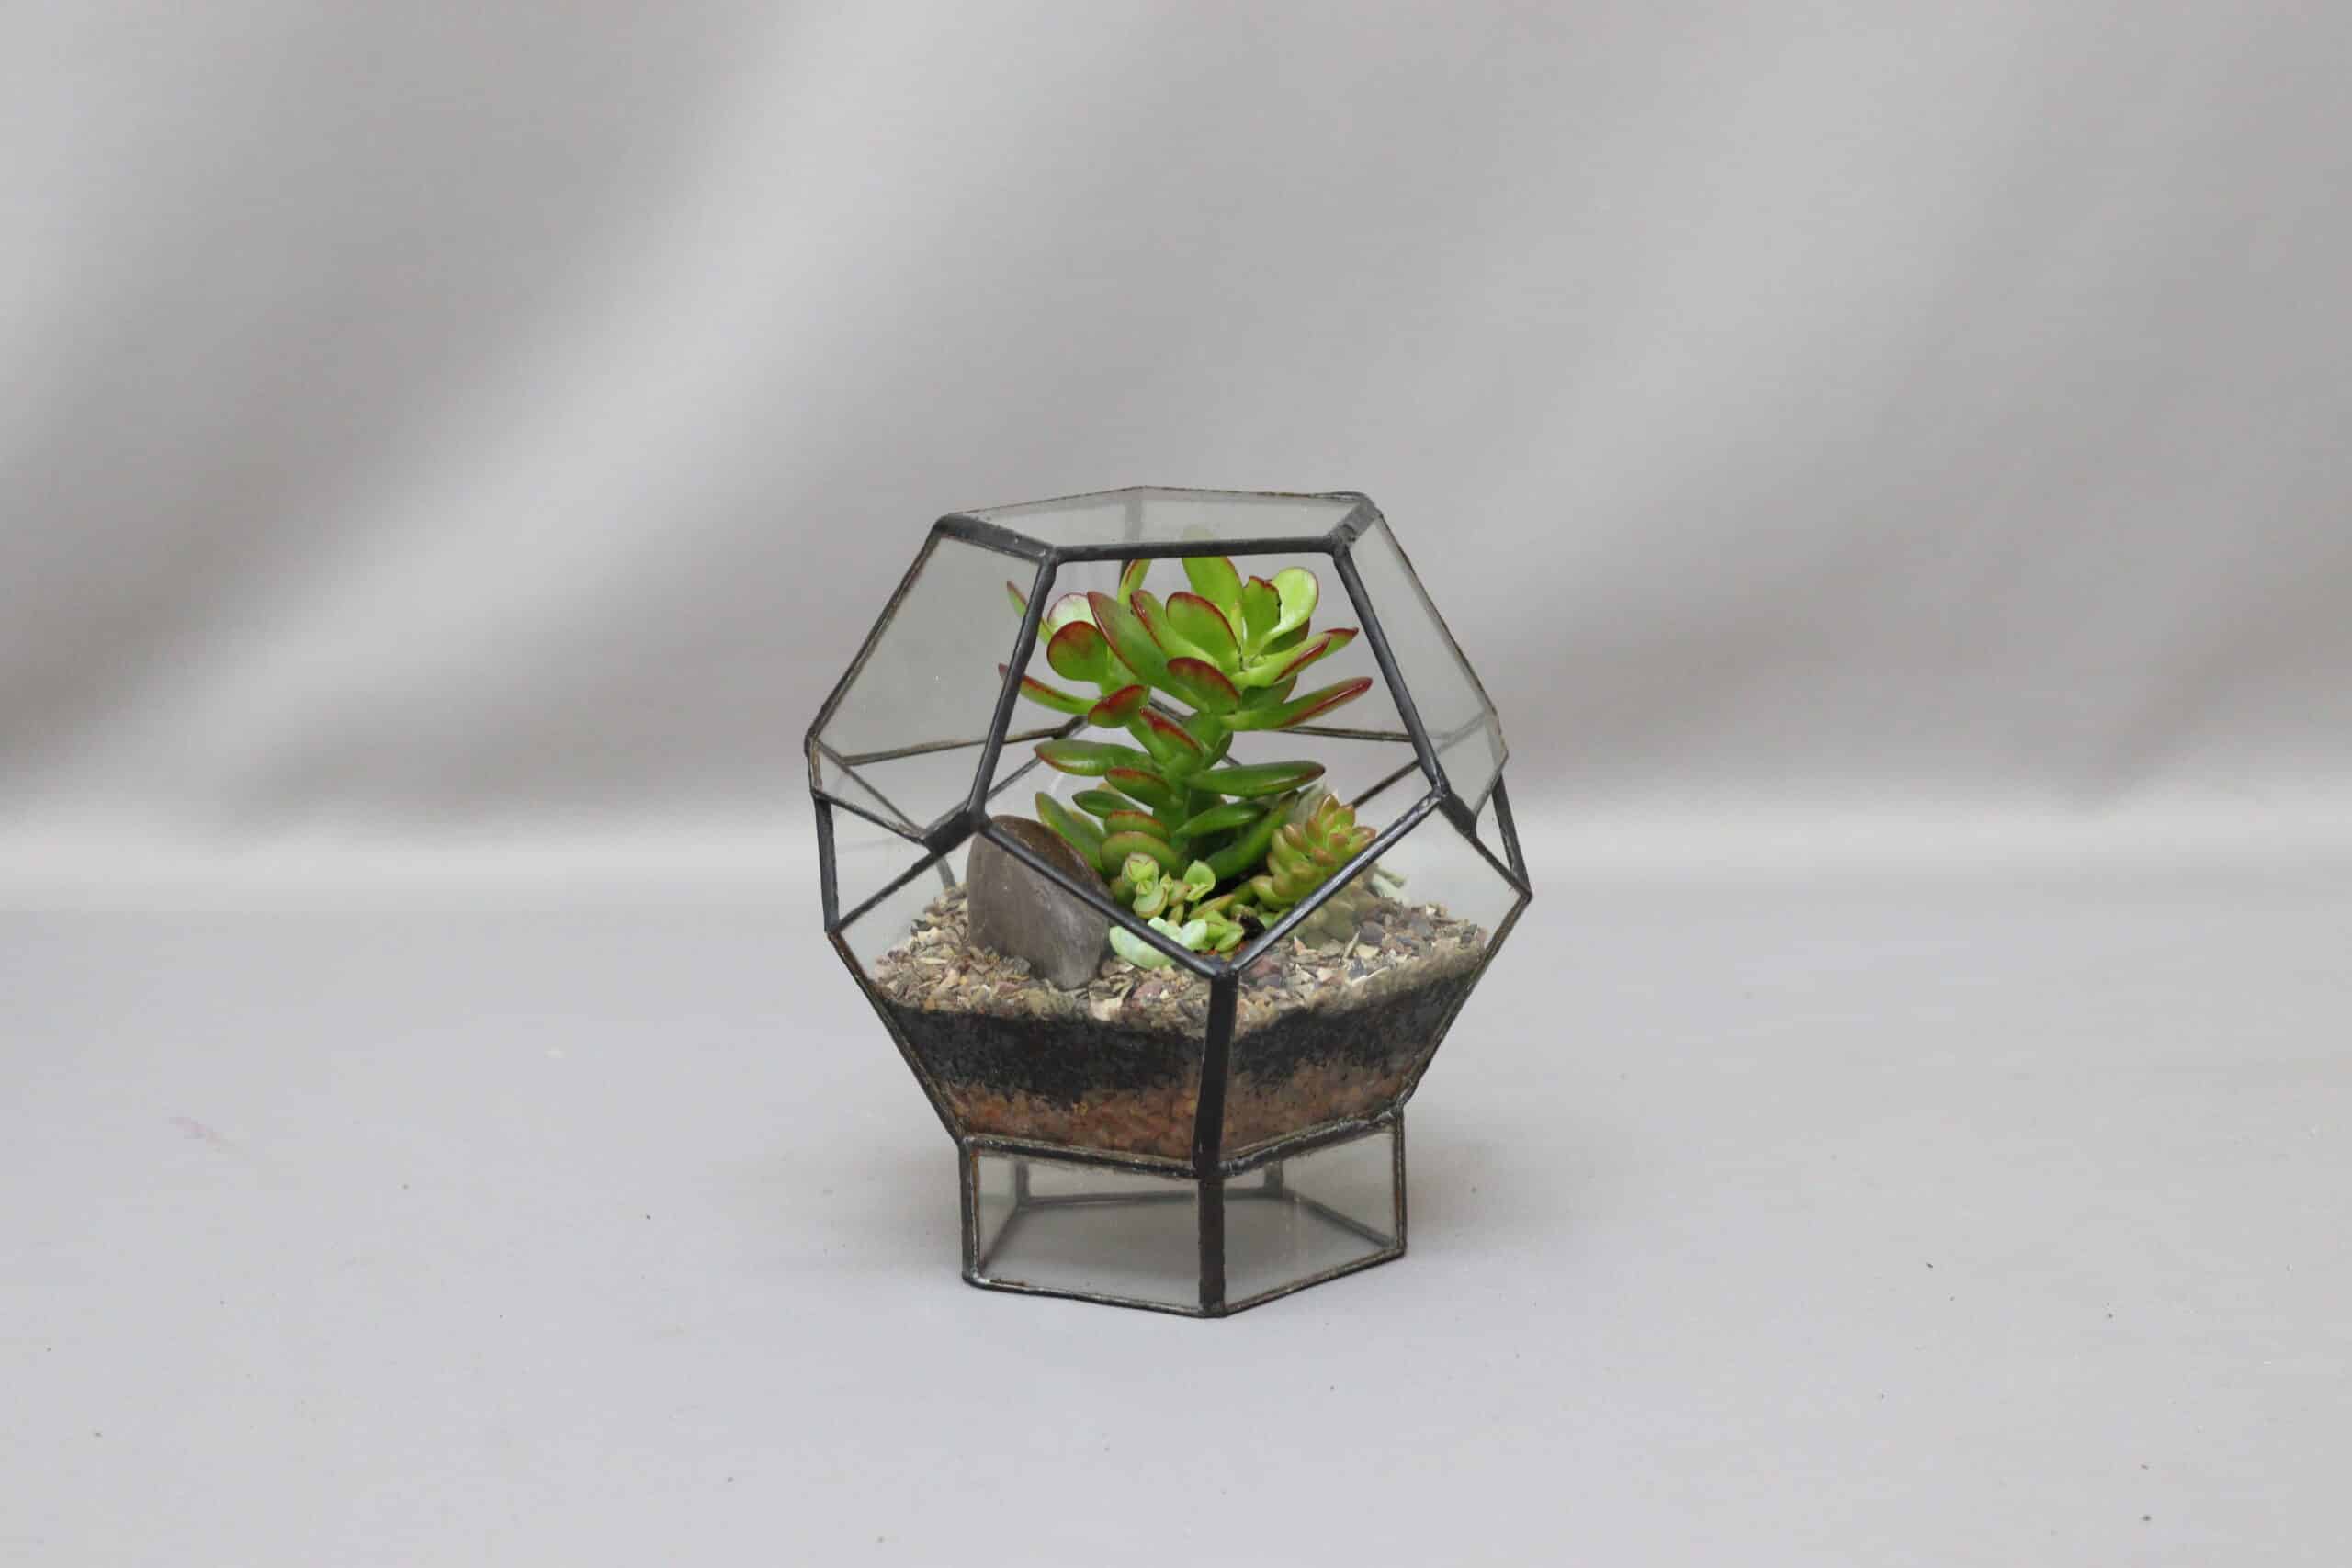 A small geometric-inspired glass terrarium planter with an assortment of succulents inside, against a plain grey background.